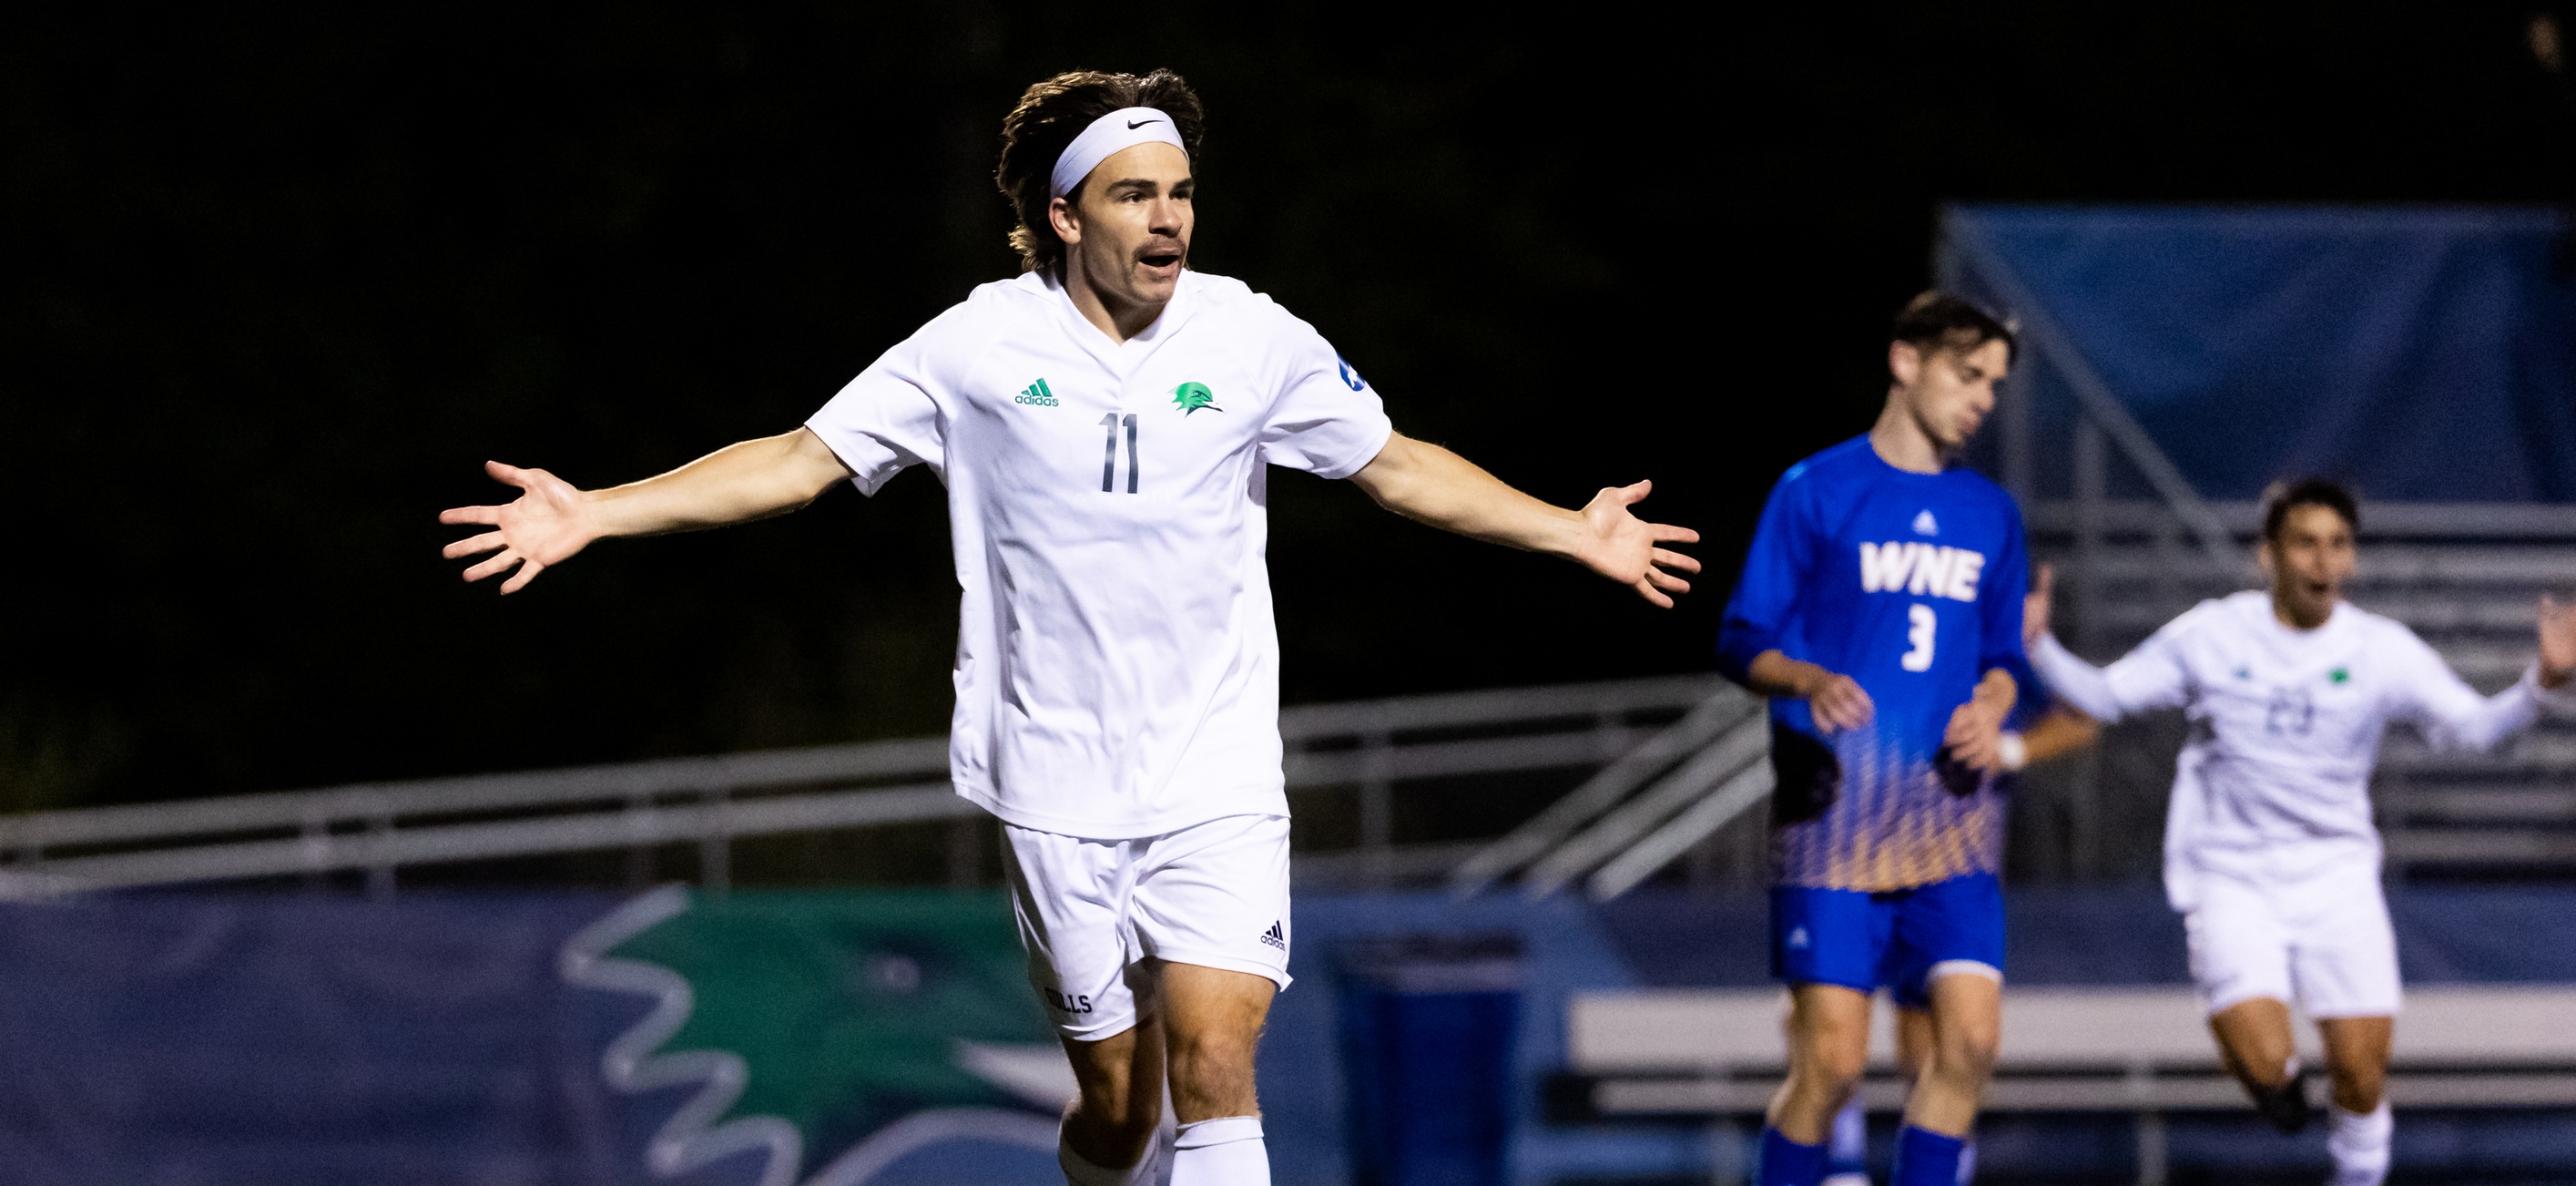 Men’s Soccer Takes Down Western New England On Homecoming Weekend, 1-0